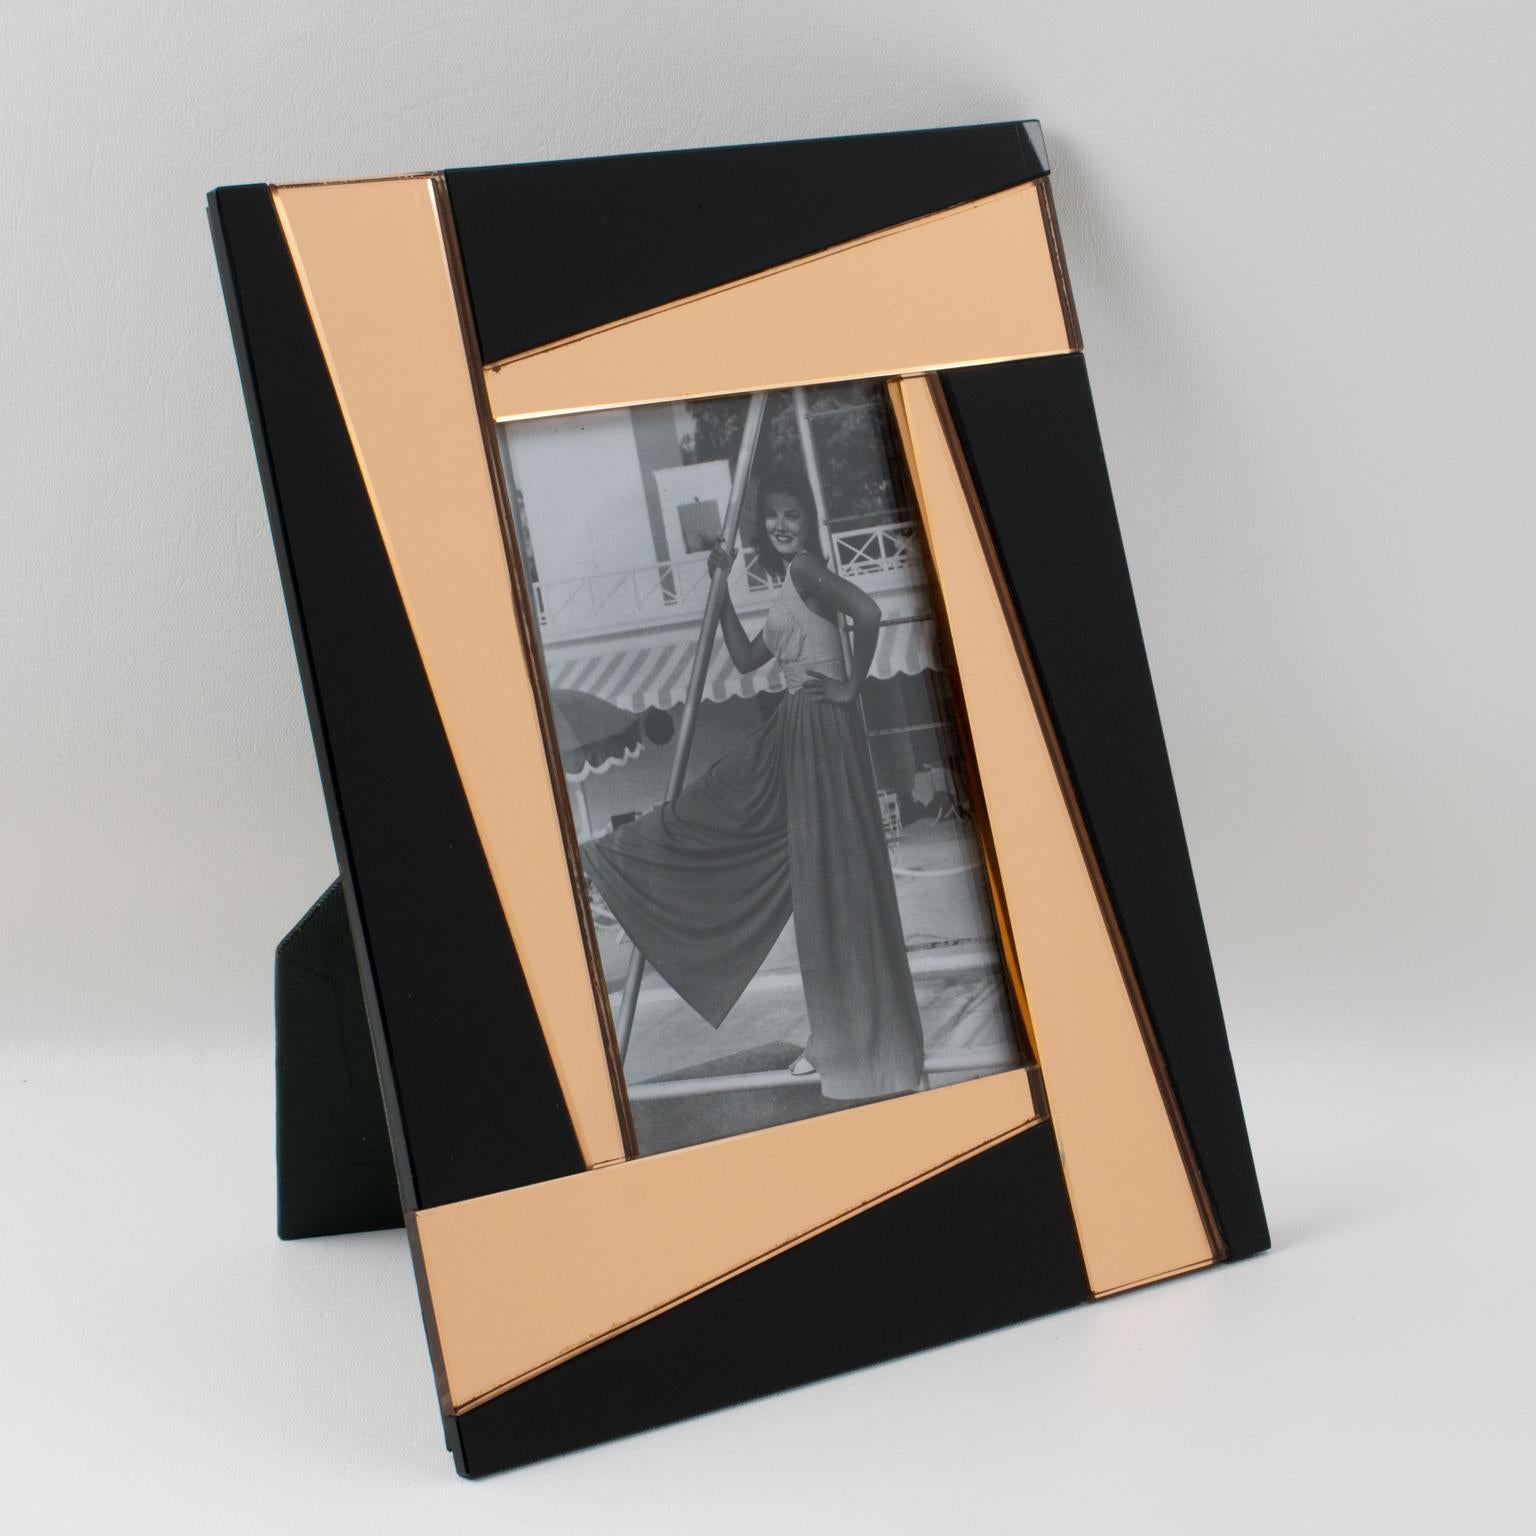 A charming French 1940s mirrored picture photo frame. Beveling with a geometric pattern in lovely copper or pink peach tone contrasted with black colored mirror. The frame can be placed either in portrait or in landscape position. The back and easel